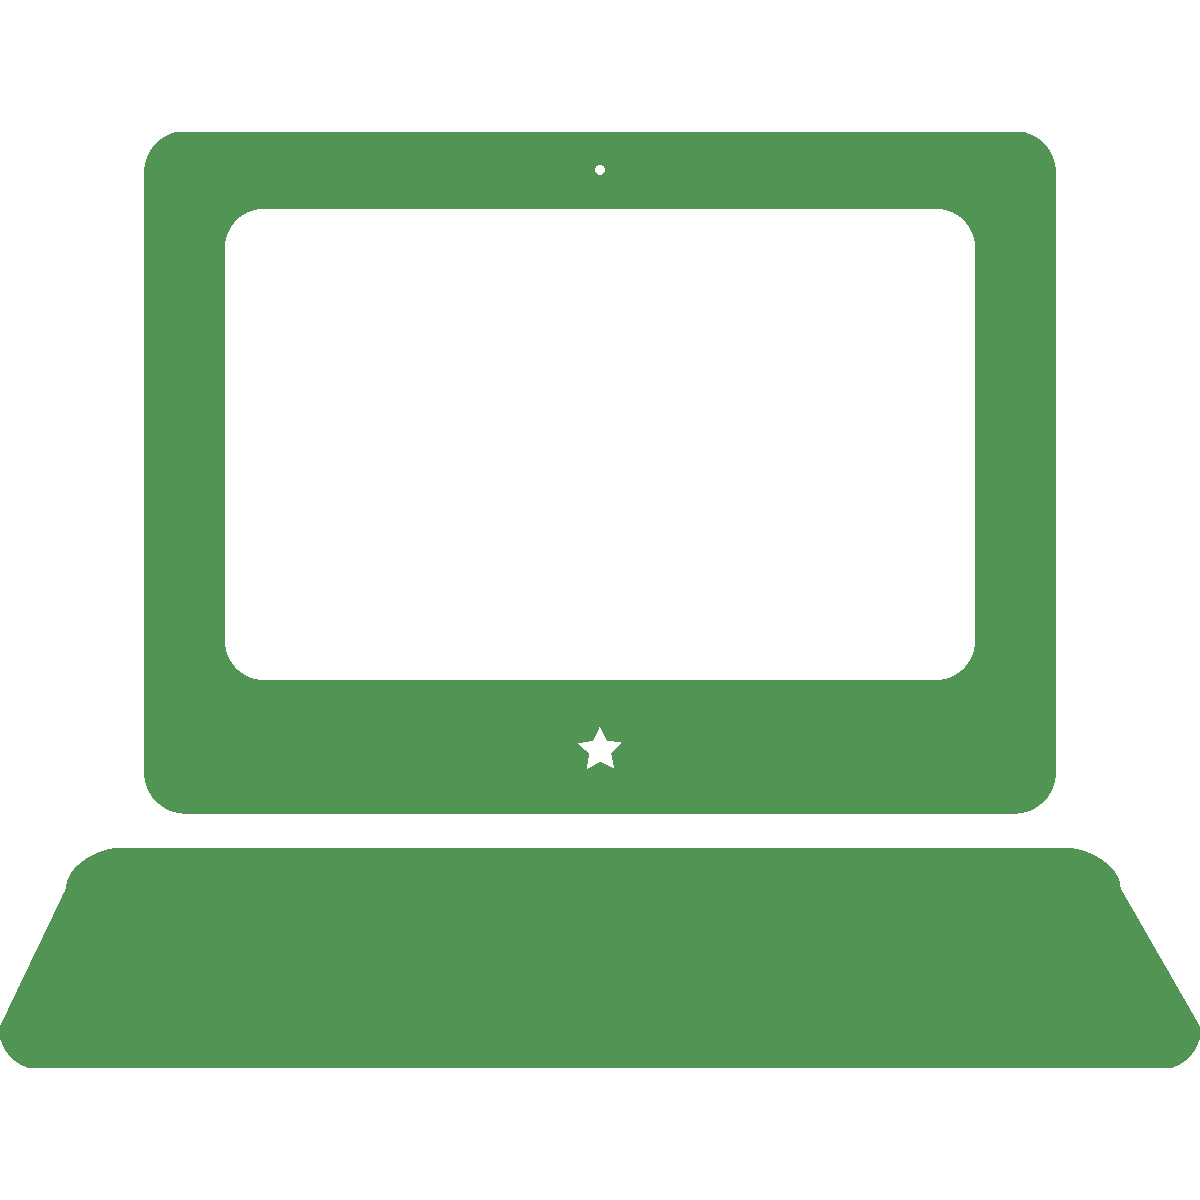 Laptop designed by Venkatesh Aiyulu from the Noun Project